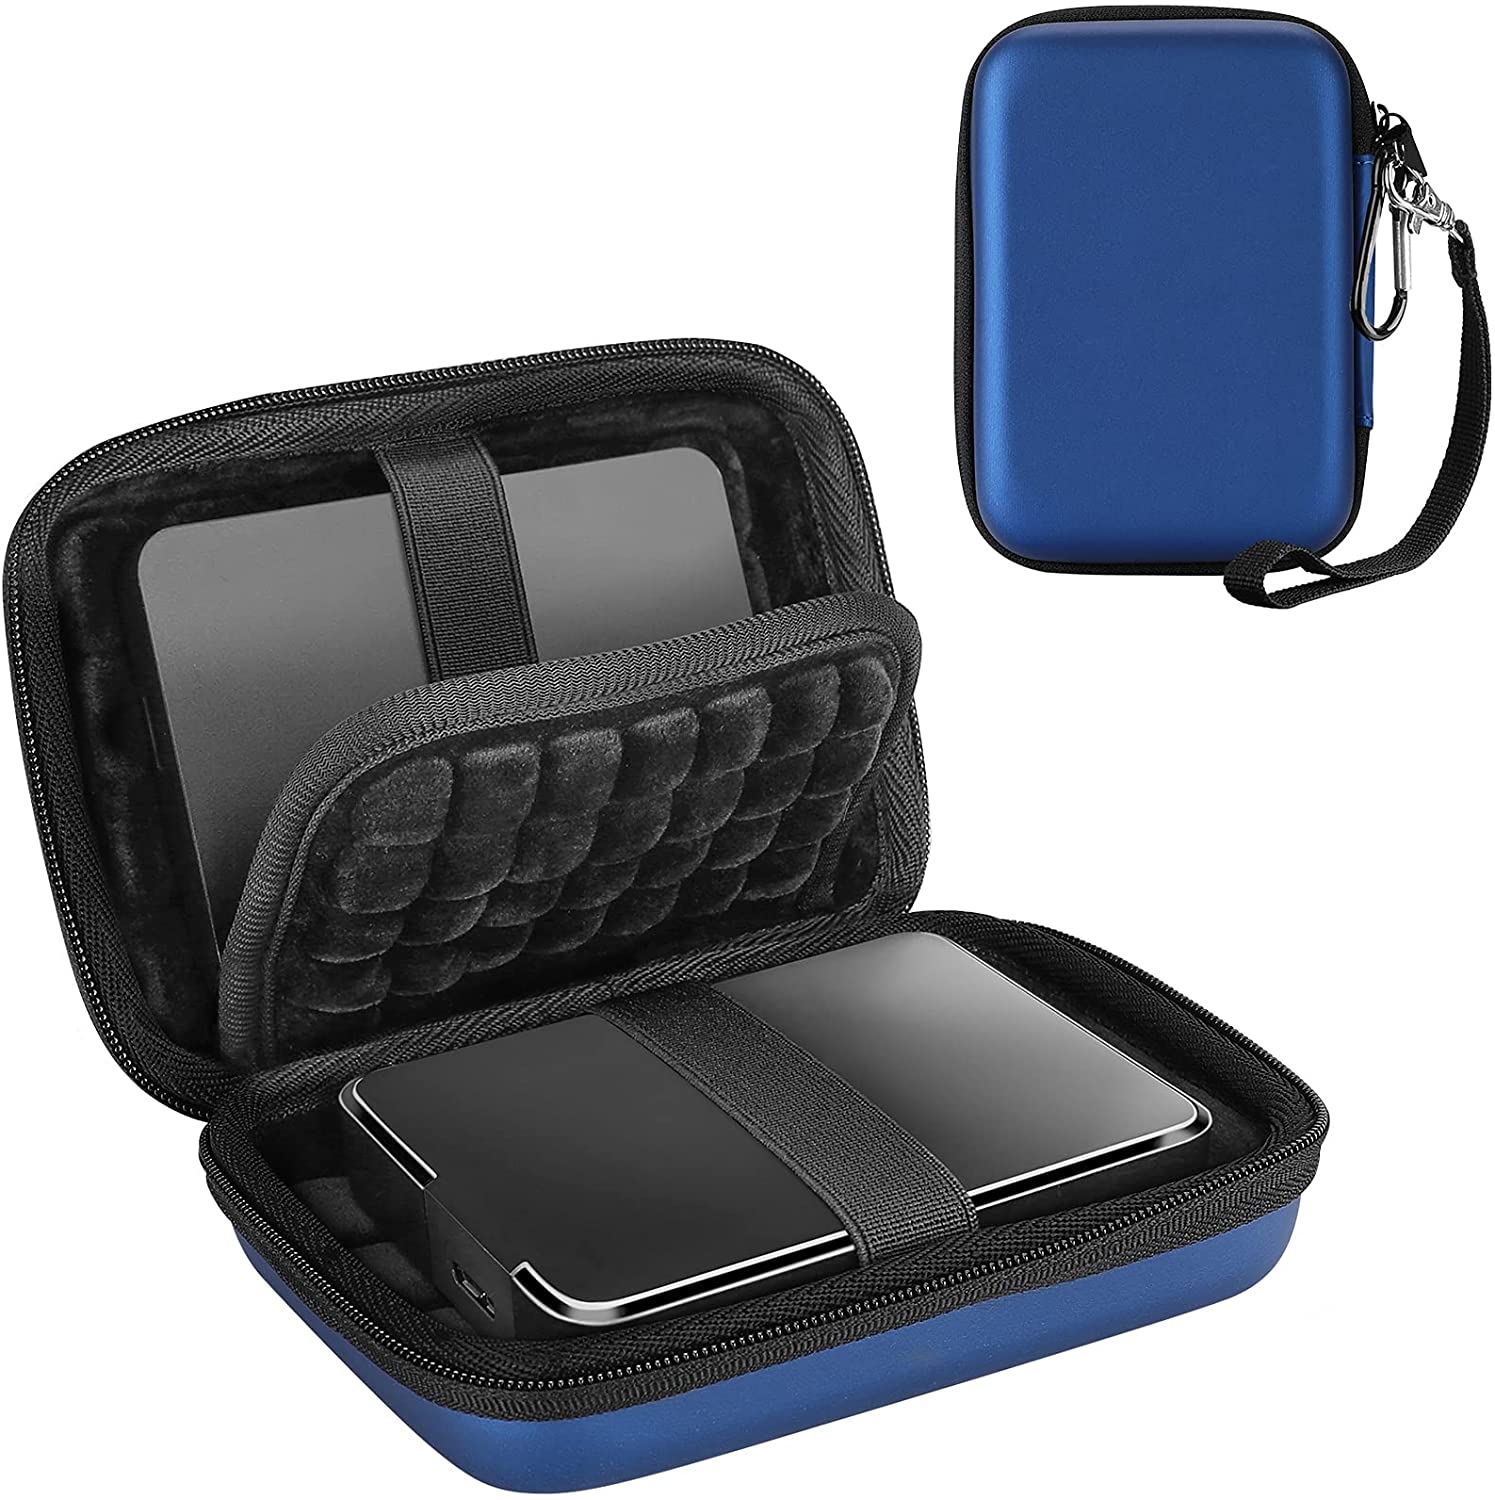 Pro-Pack II with Quartz Stone Base and Hard Carrying Case